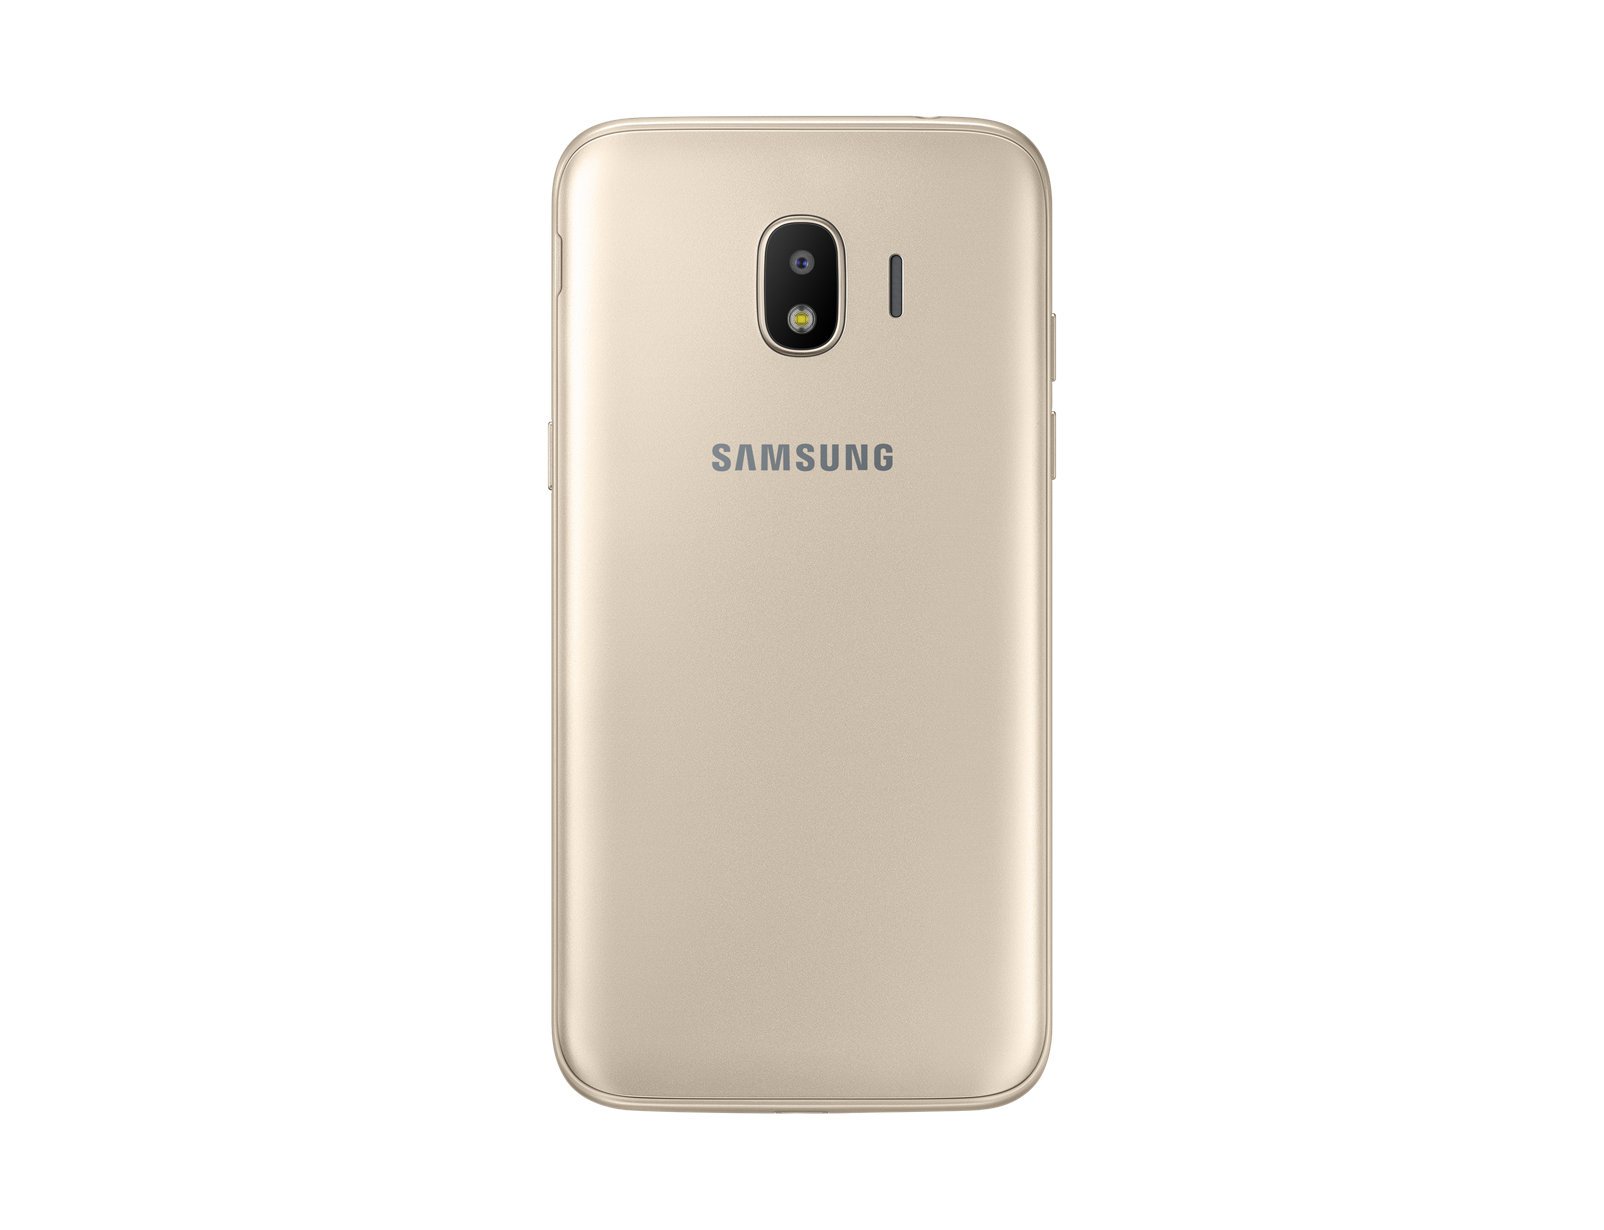 Samsung Galaxy Grand Prime Pro specs, review, release date - PhonesData